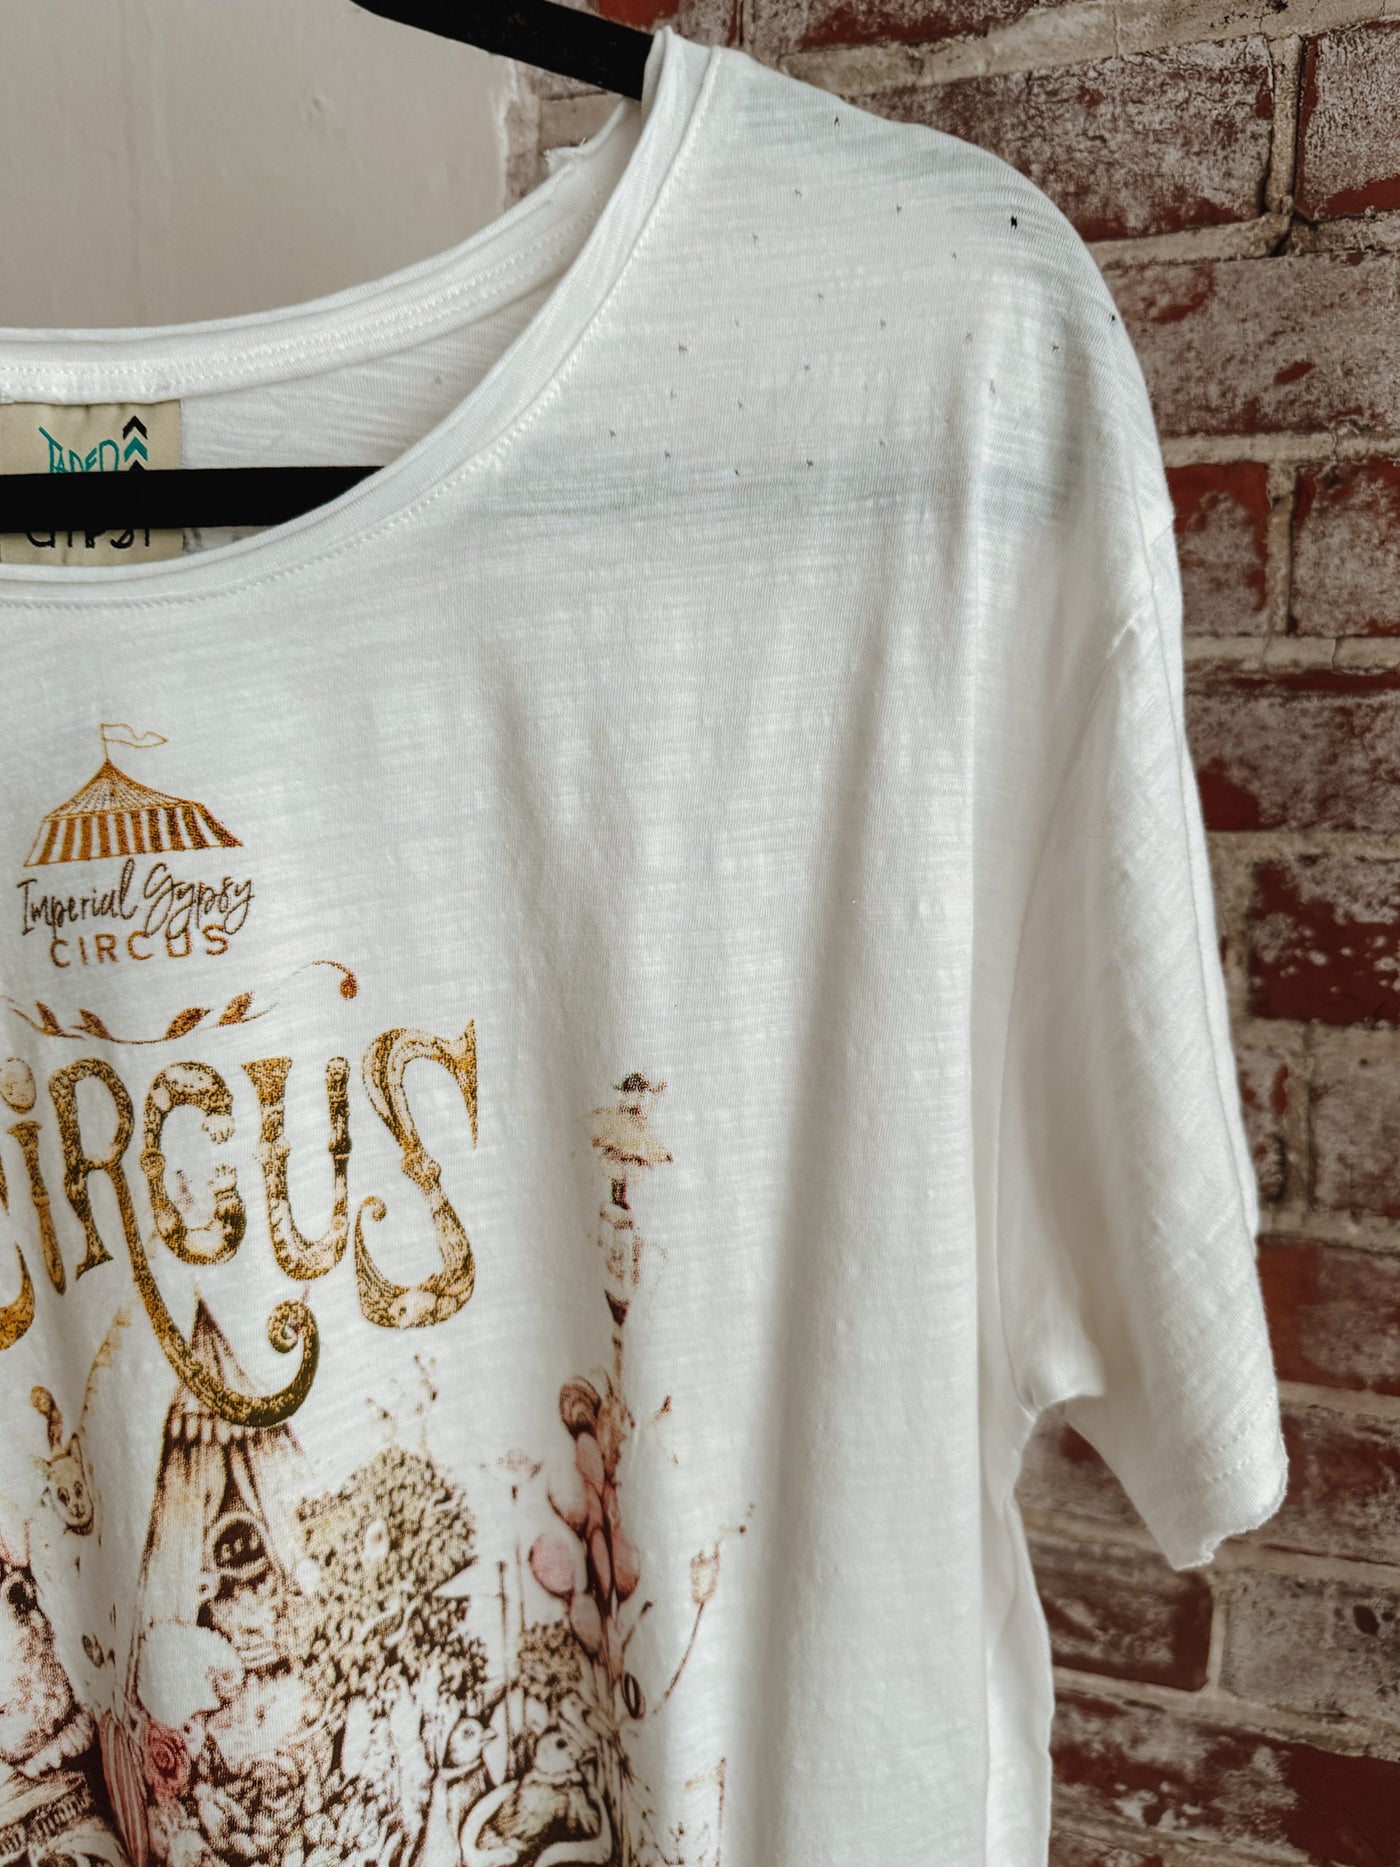 Gypsy Circus Graphic Tee